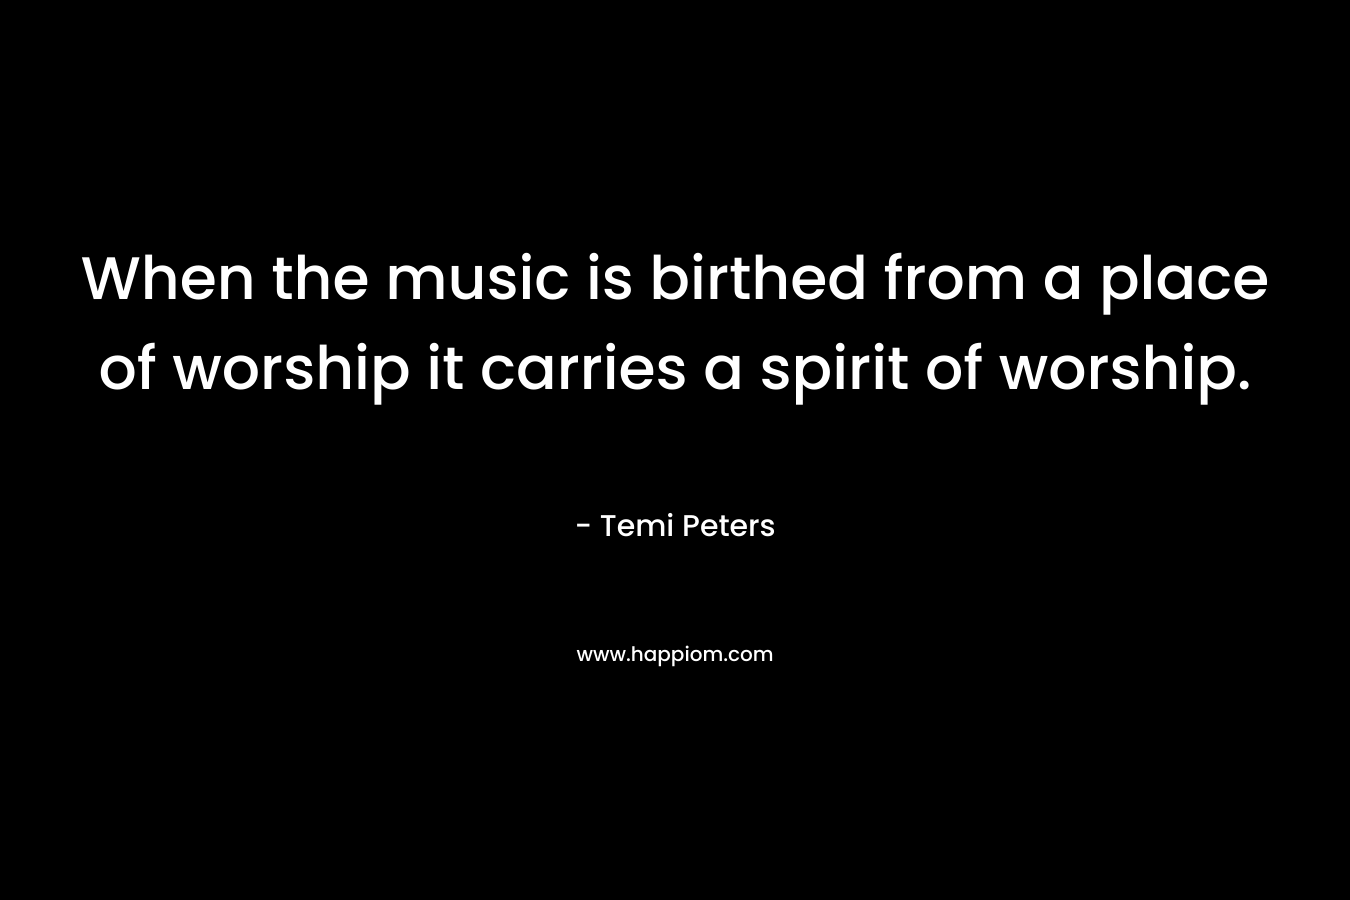 When the music is birthed from a place of worship it carries a spirit of worship. – Temi Peters